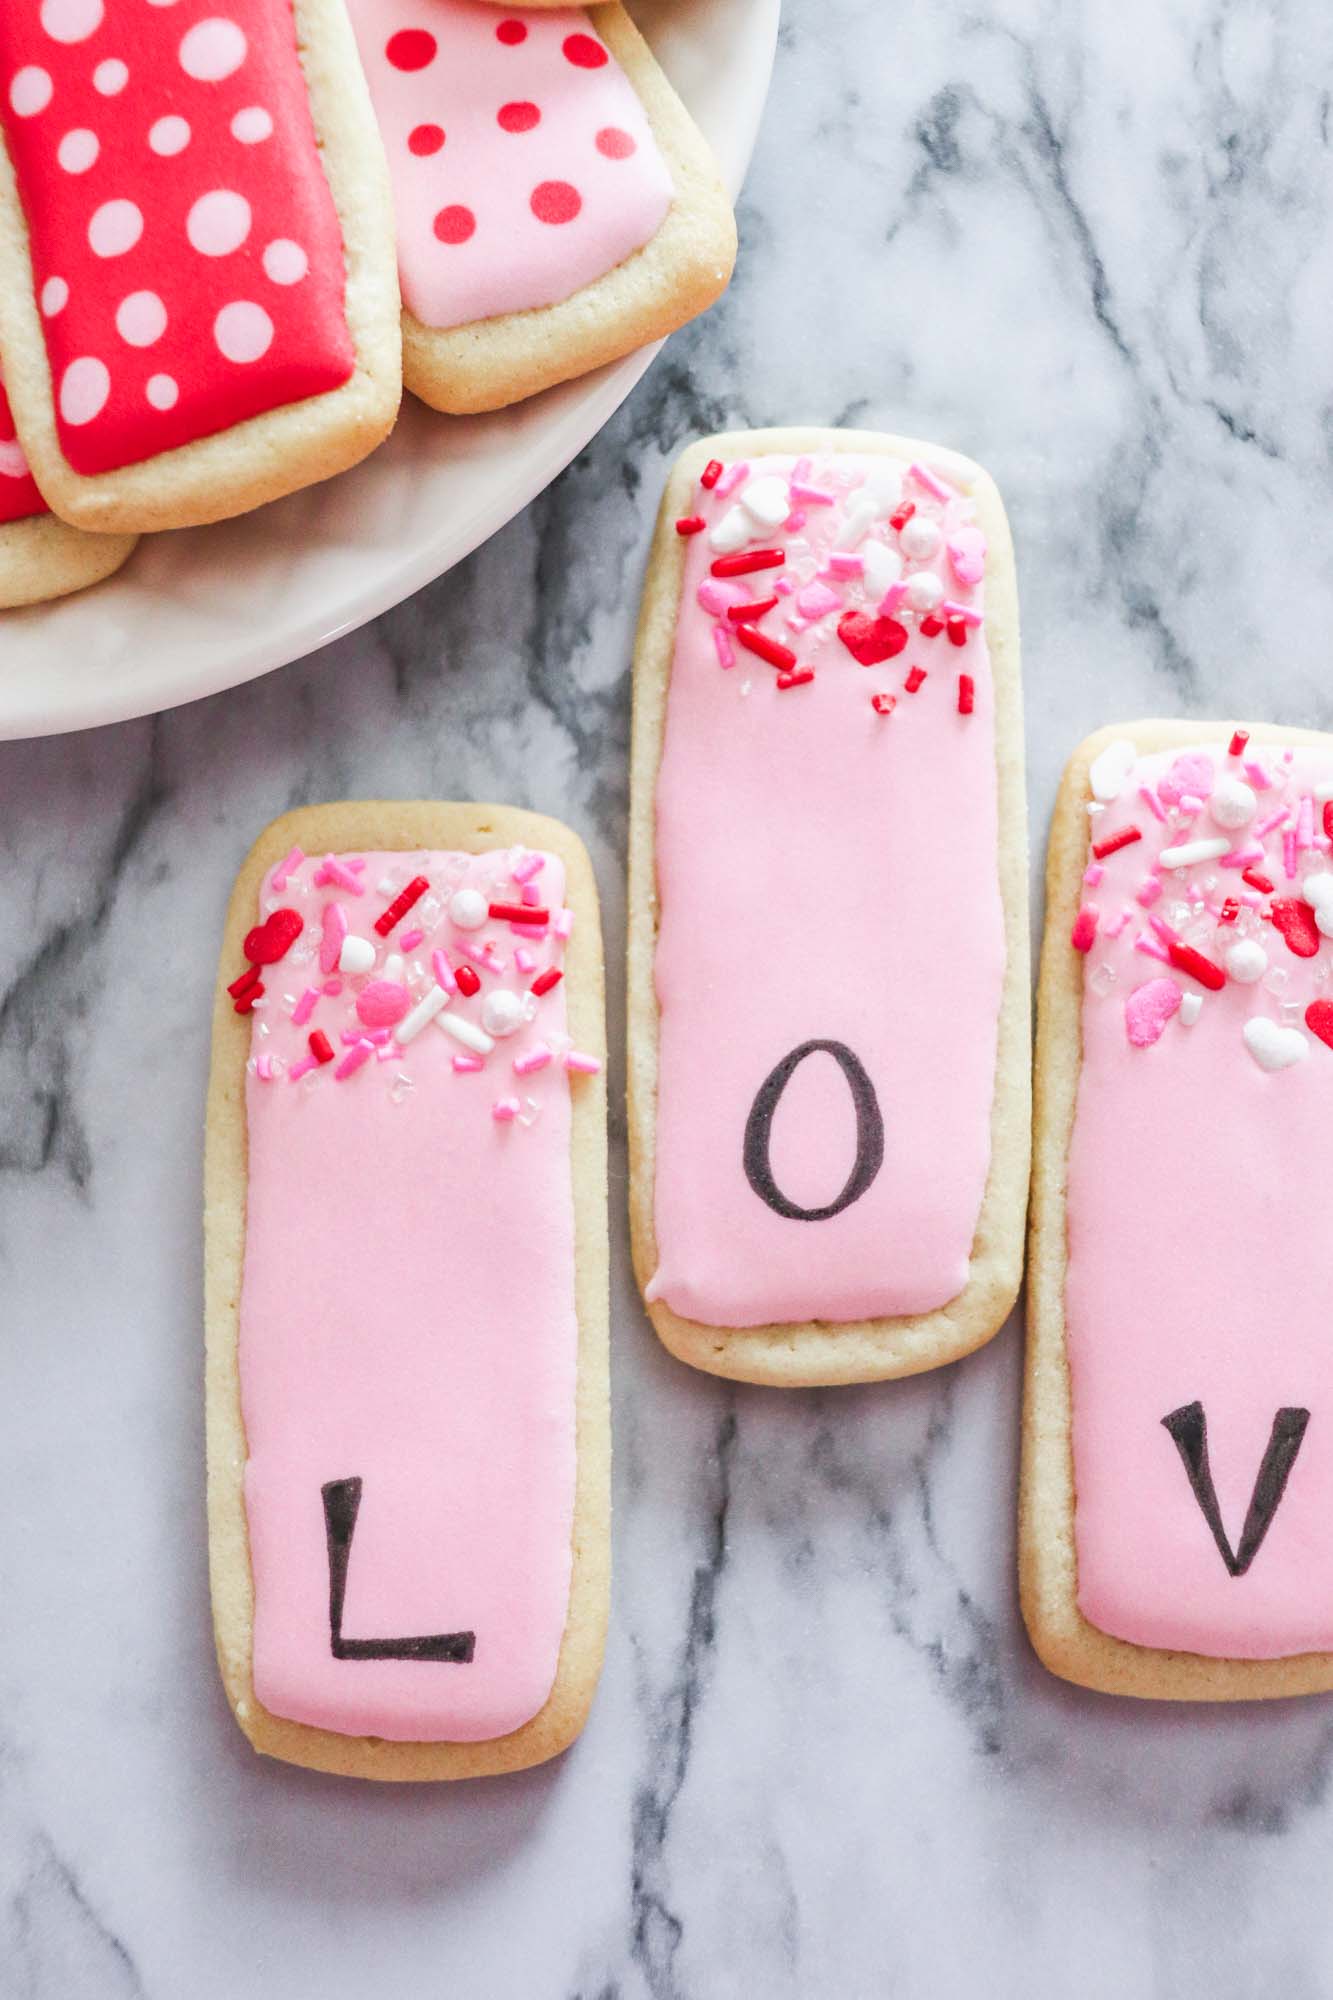 three rectangular cookies with letters L, O, V on them. Valentines themed sugar cookies with royal icing